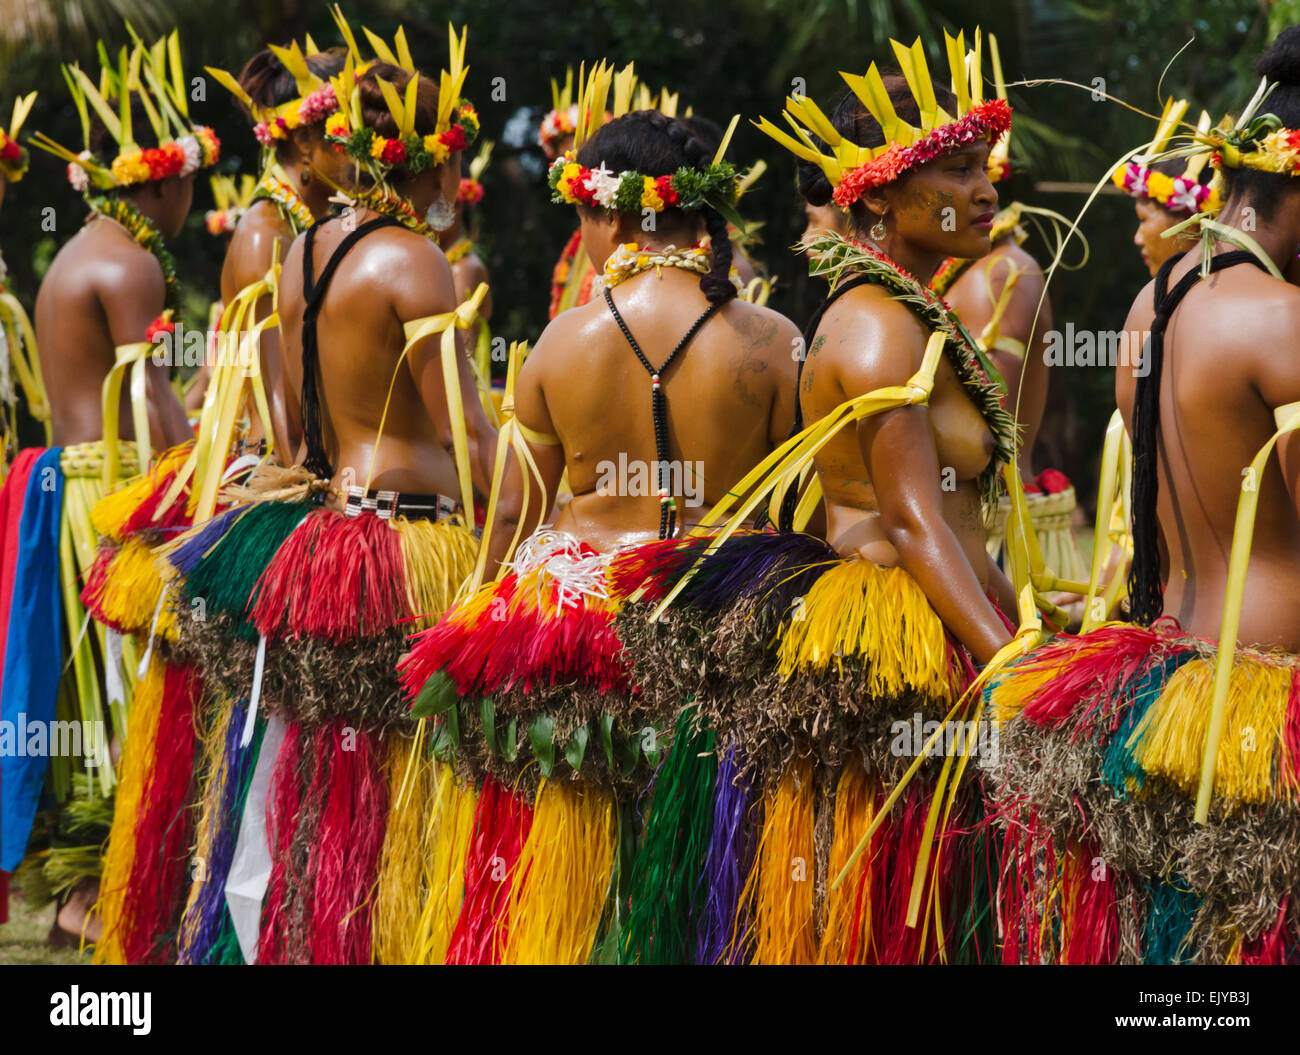 Yapese girl wearing grass skirt at Yap Day Festival, Yap Island, Federated  States of Micronesia Stock Photo - Alamy